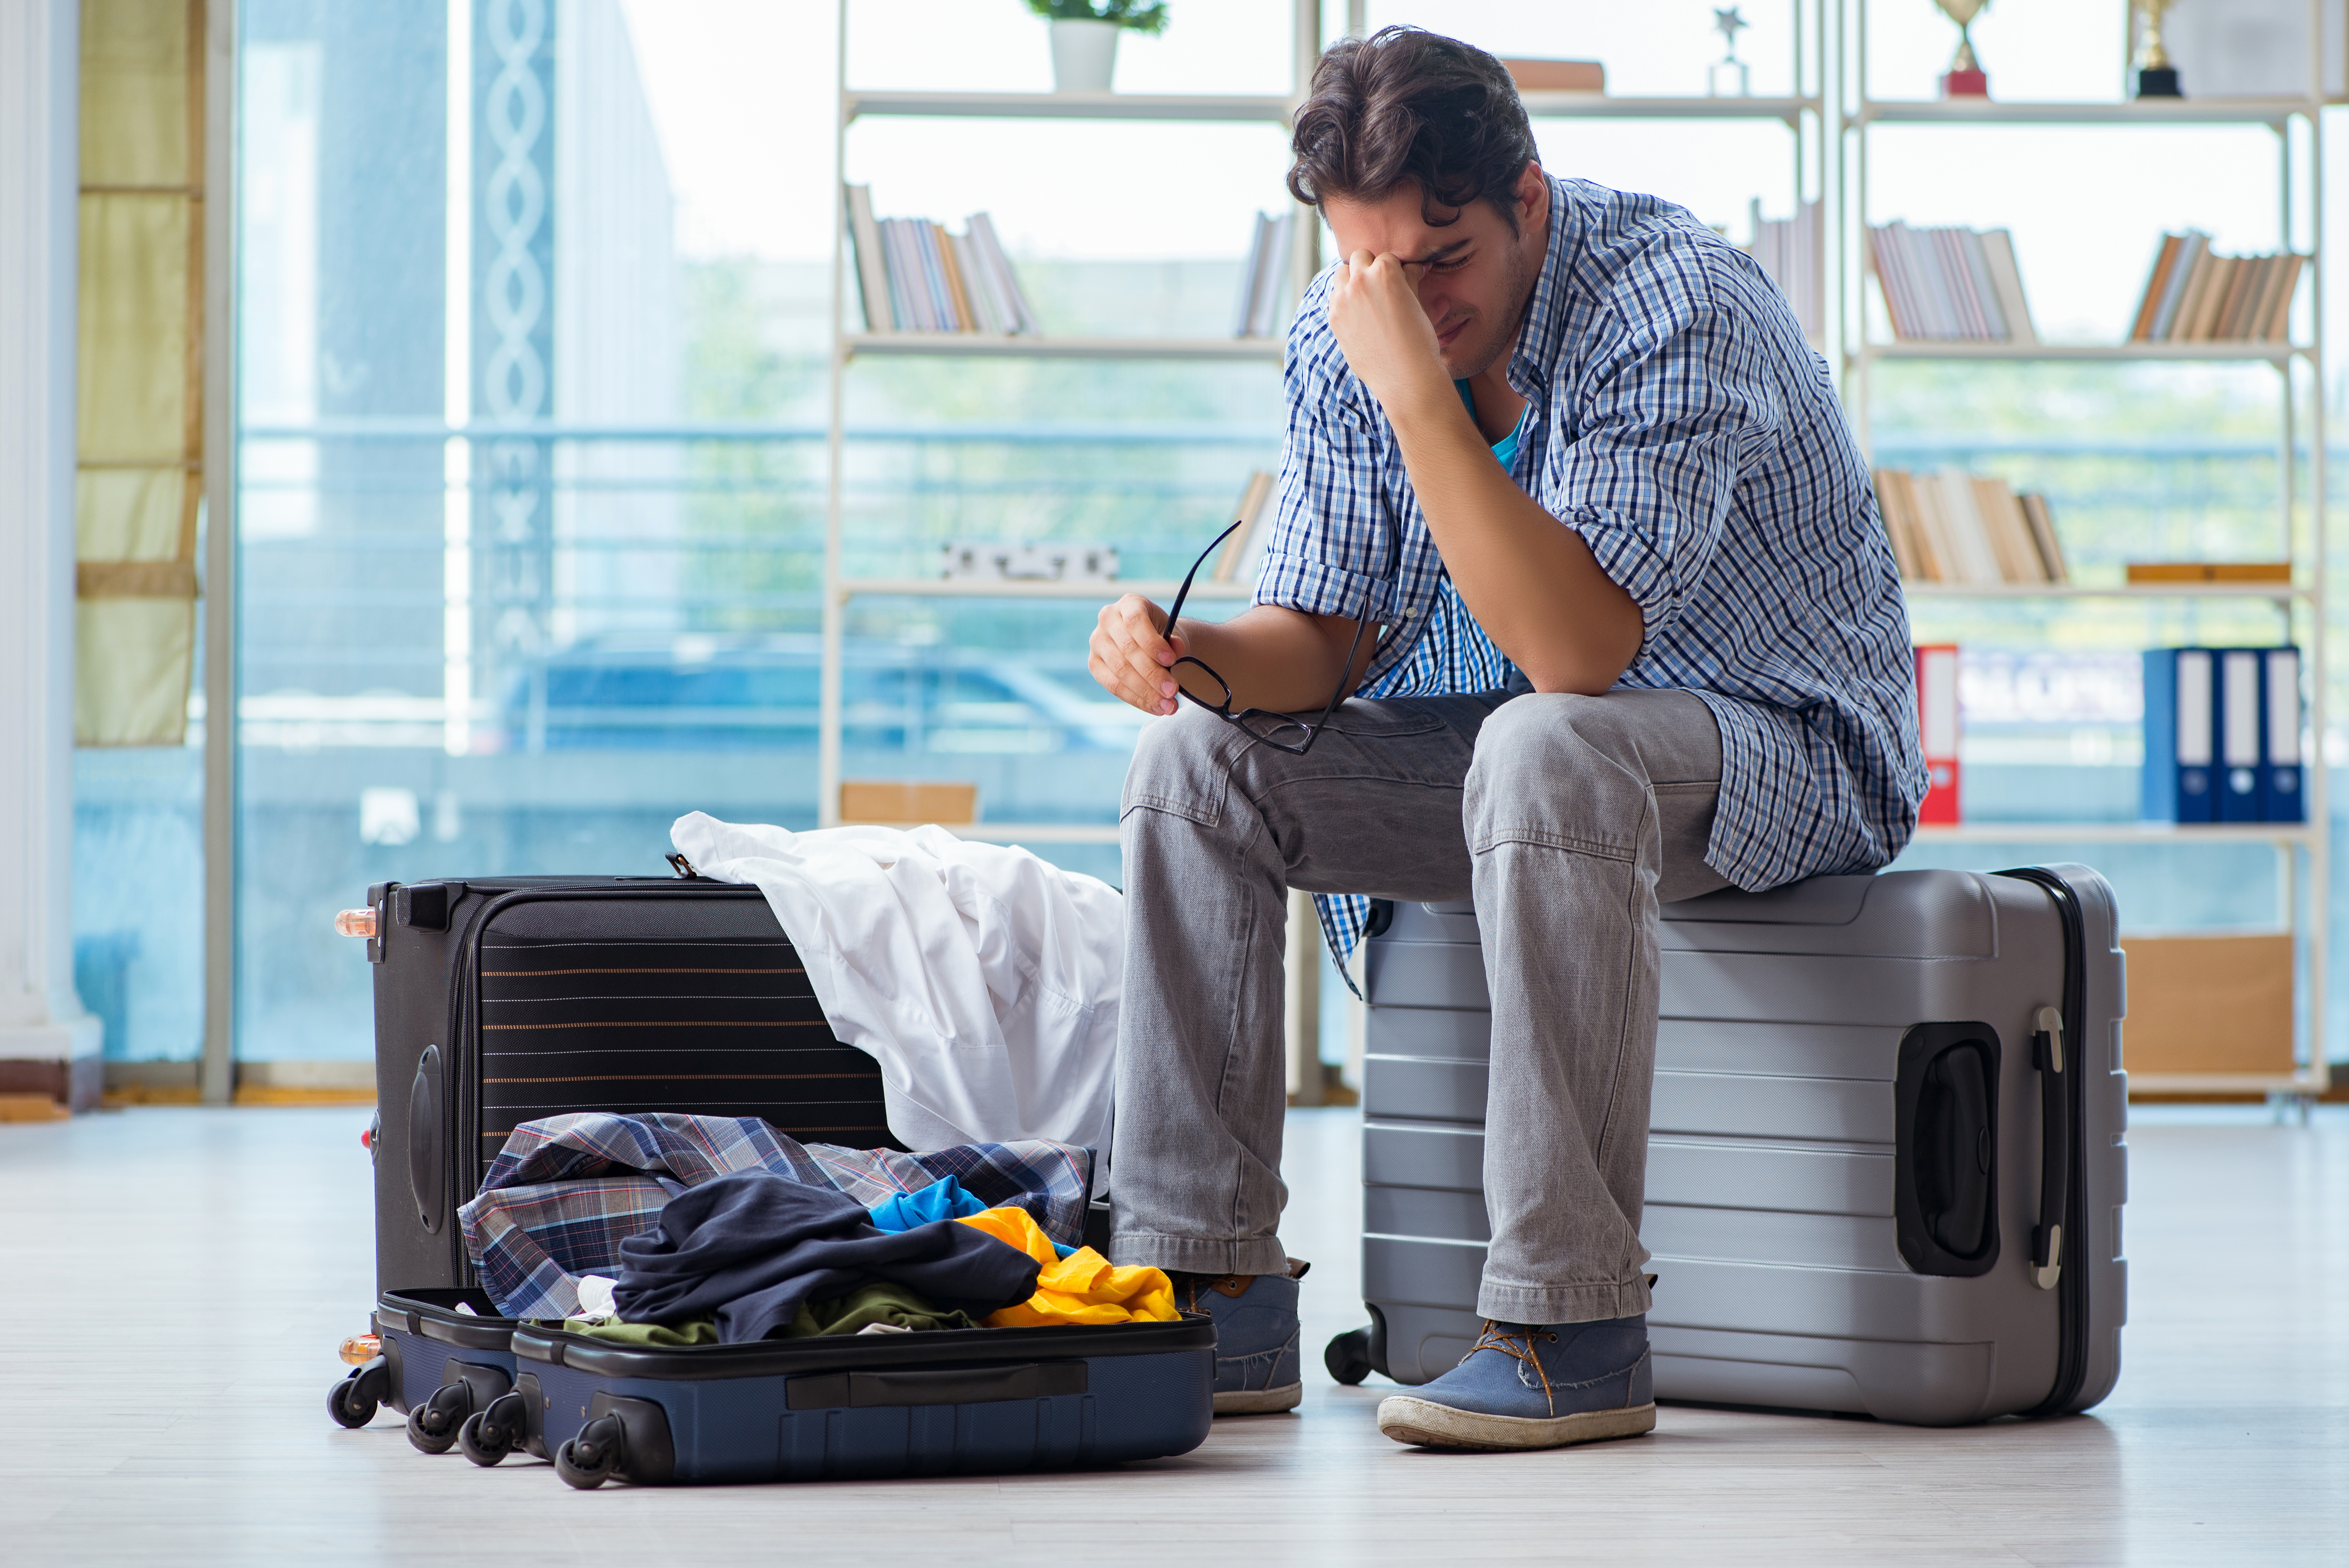 Man sitting on a suitcase looking distressed